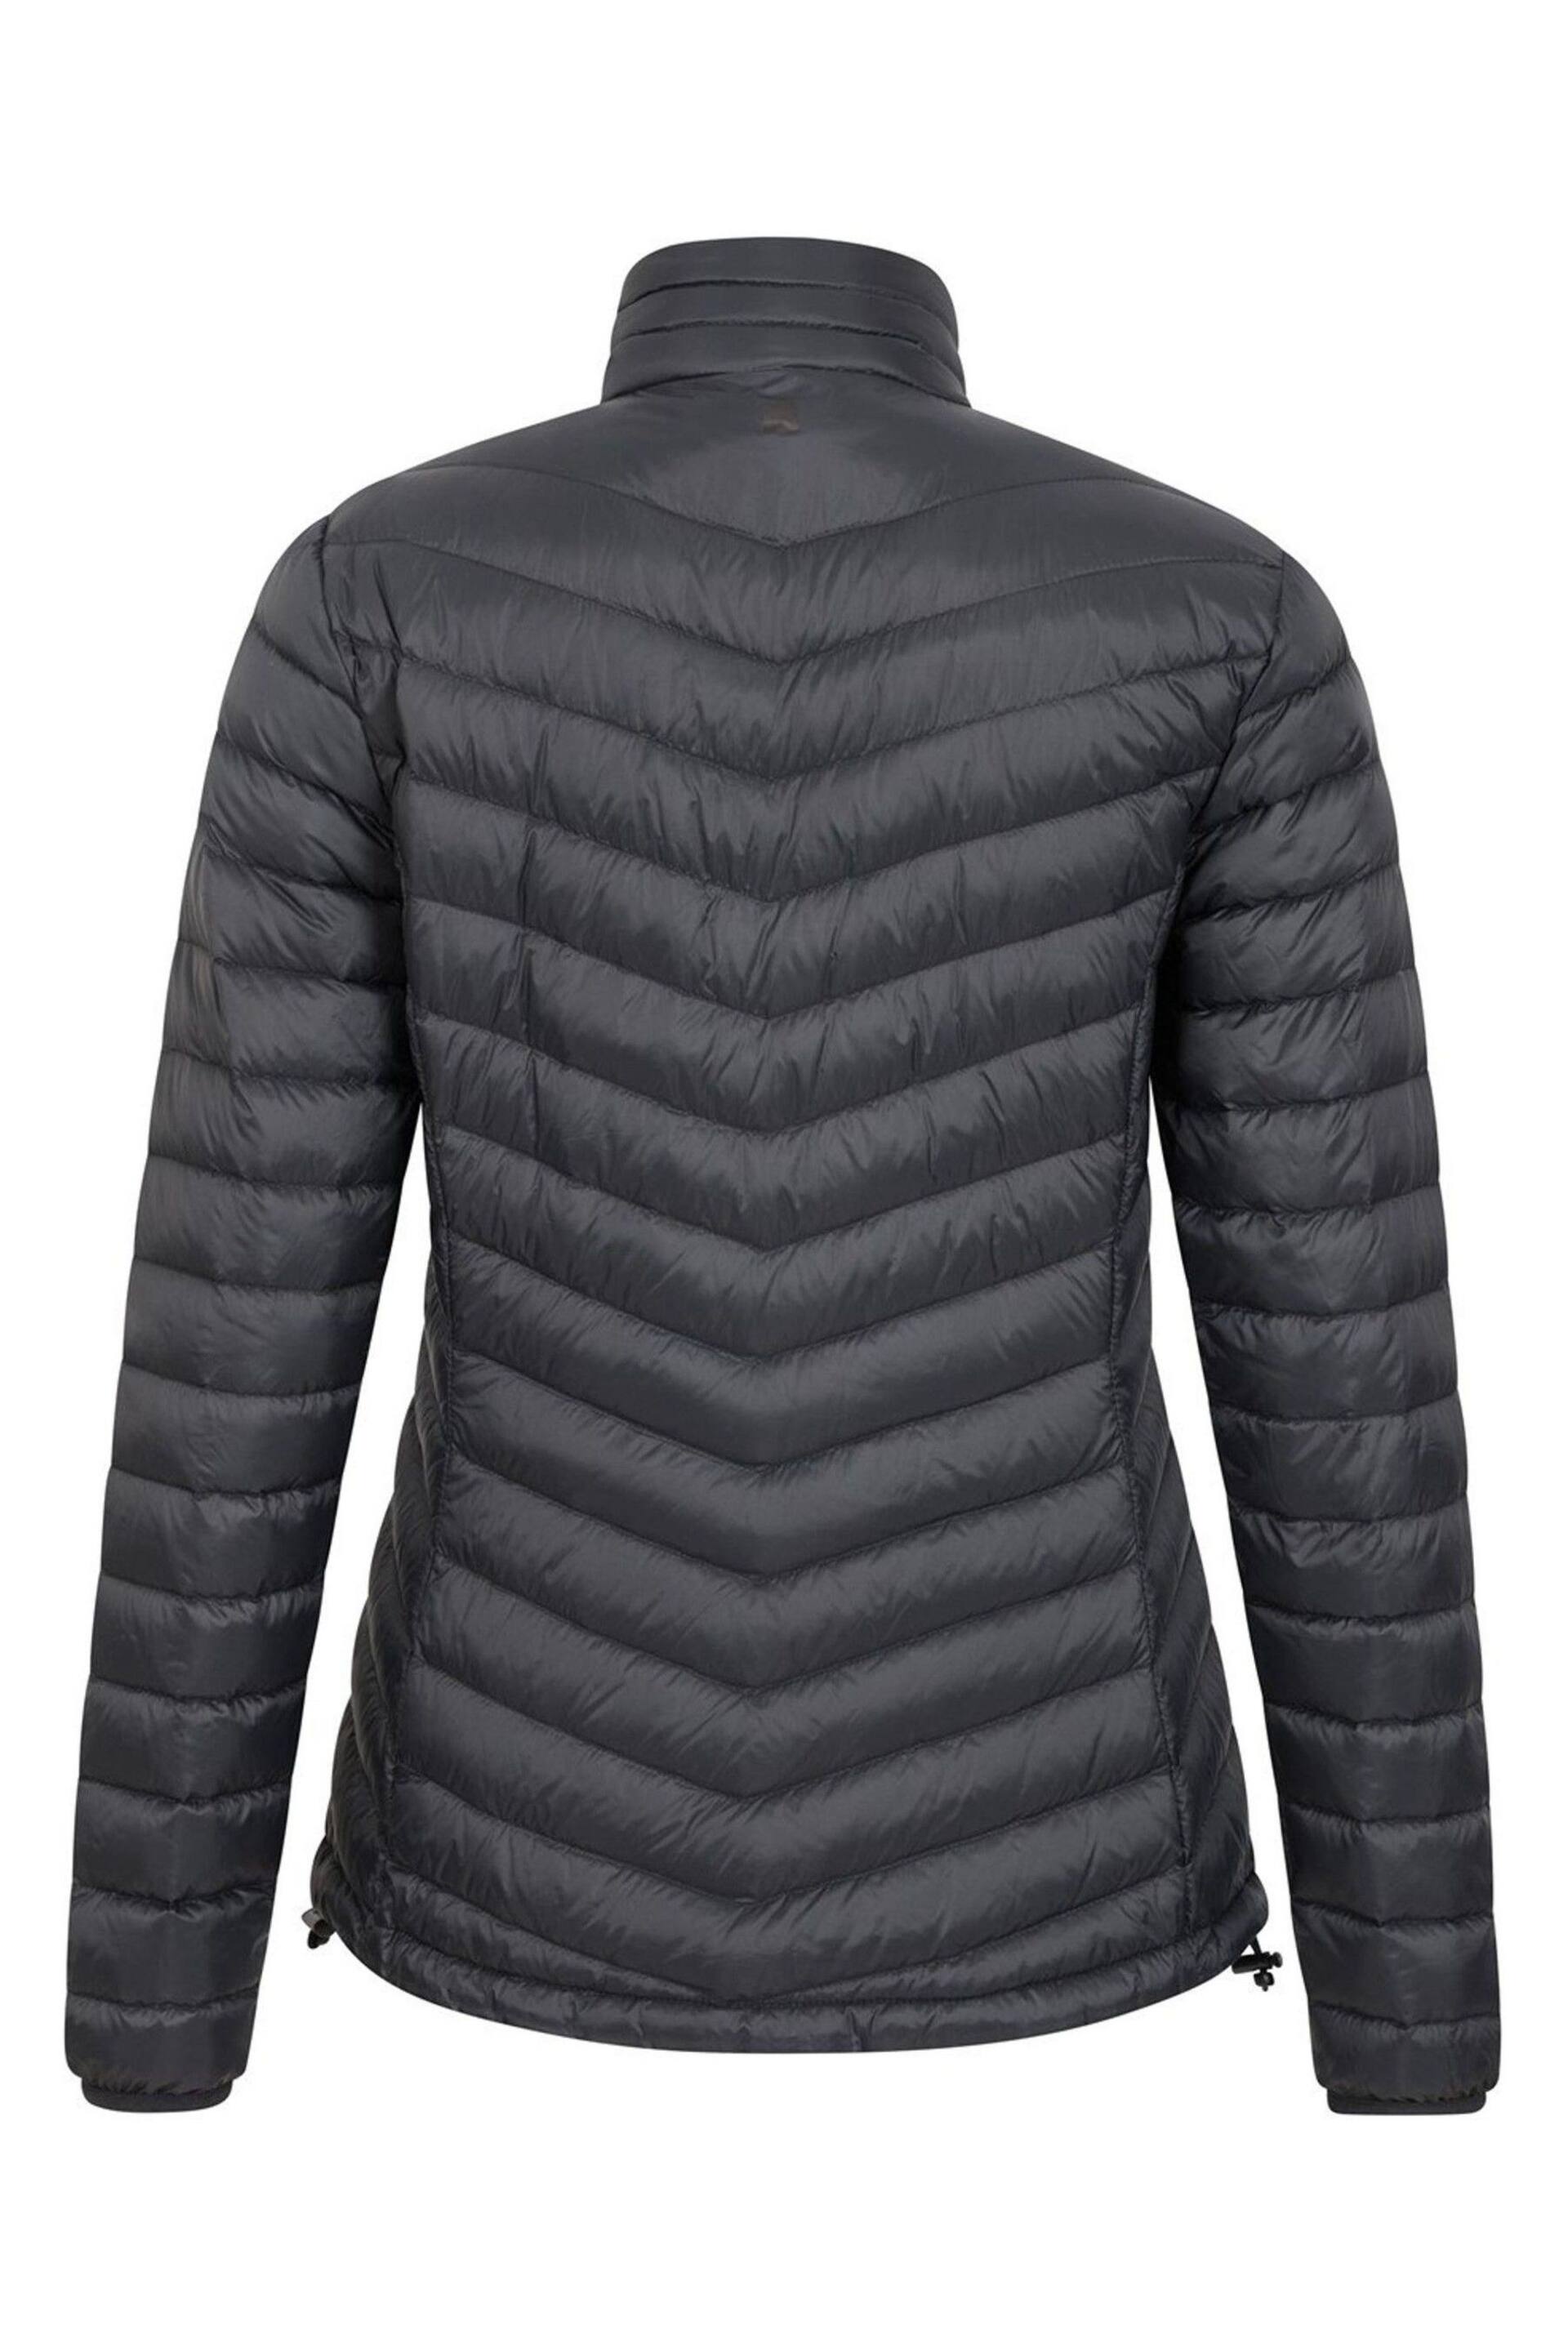 Mountain Warehouse Black Featherweight Water Resistant Down Jacket - Womens - Image 3 of 3